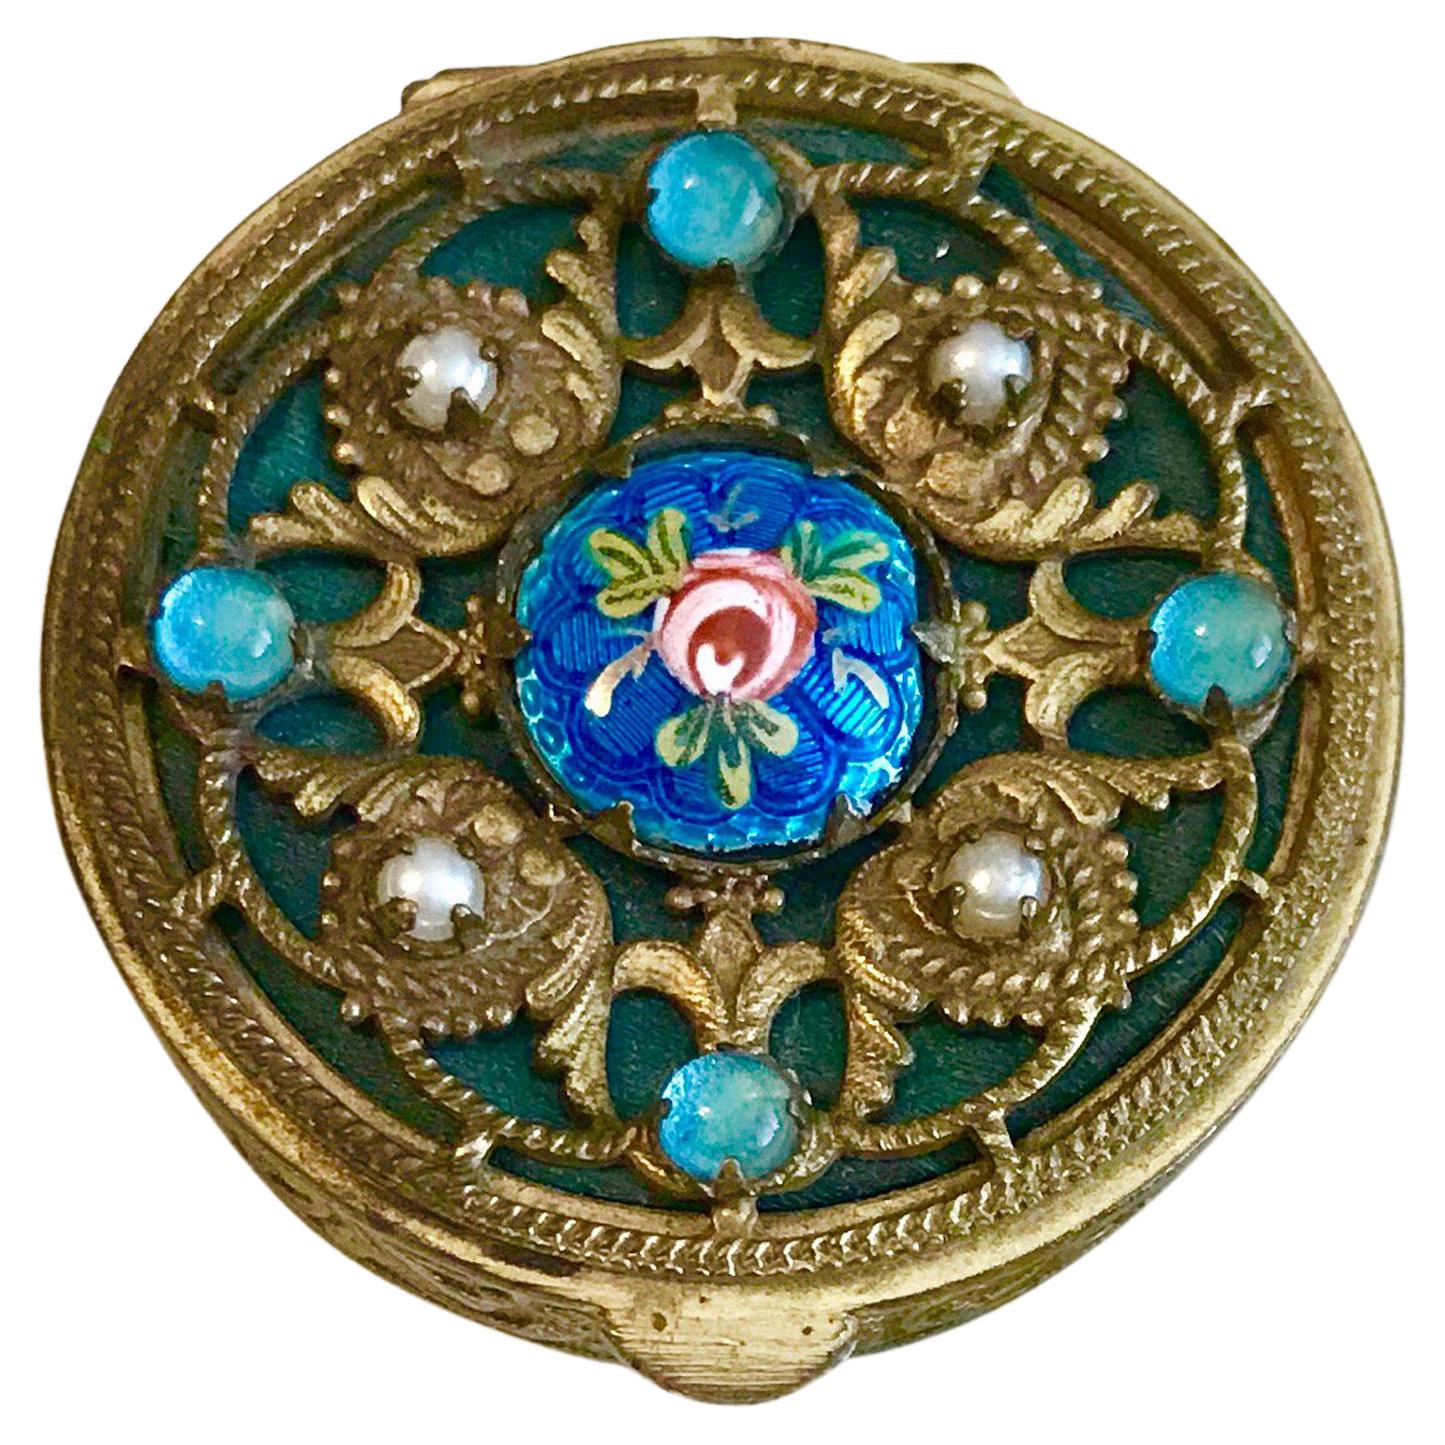 Circa 1920s Ornate French Jeweled and Enameled Powder Compact For Sale